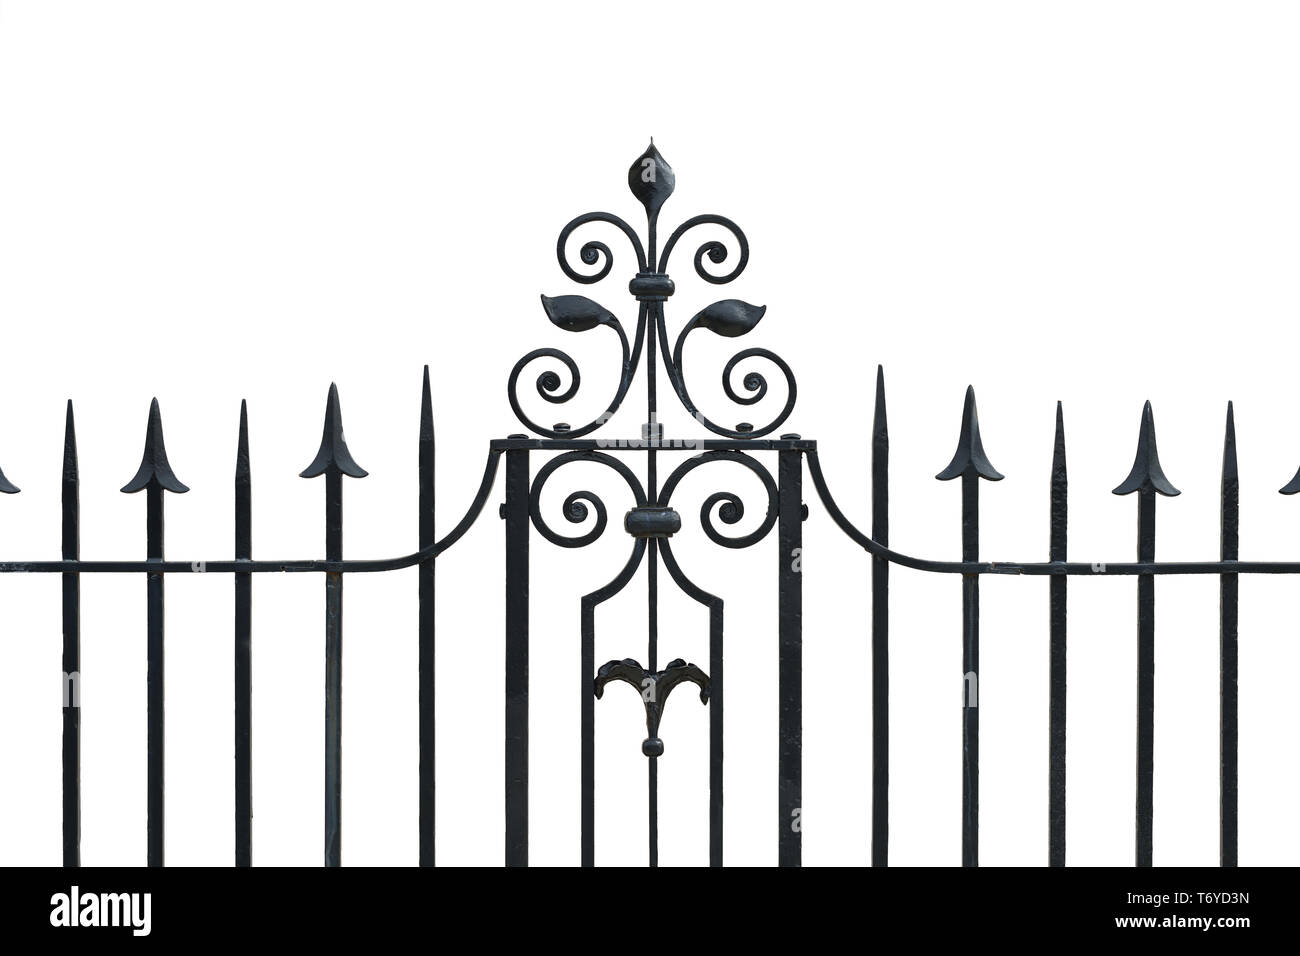 Iron fence isolated on white background, clipping path included. Leaves, scrolls, spears motives. Stock Photo